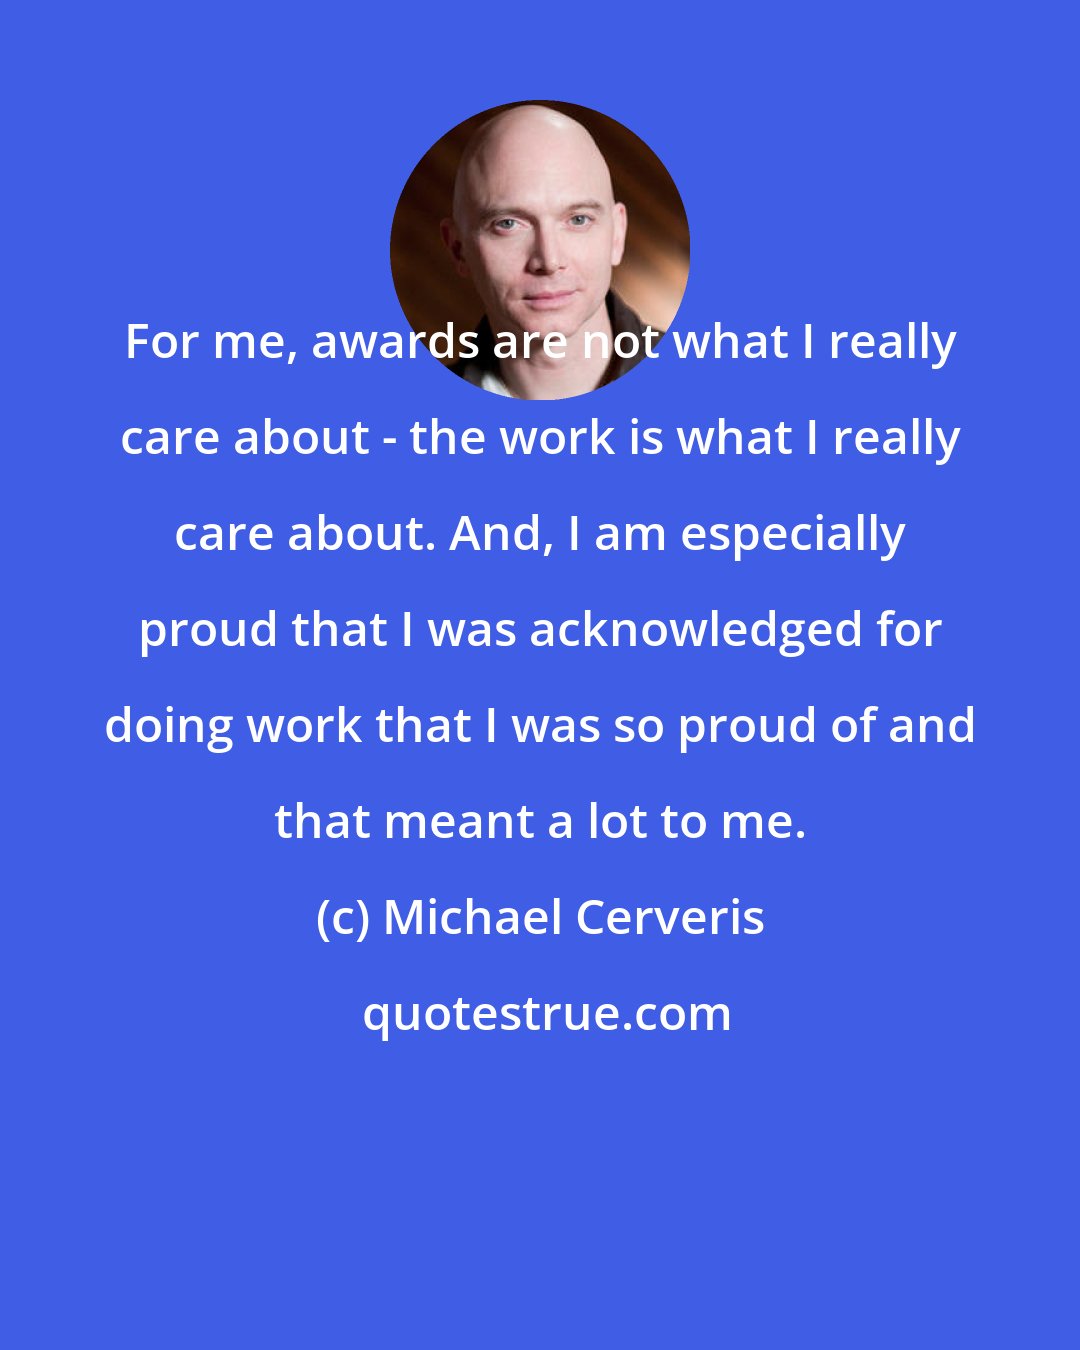 Michael Cerveris: For me, awards are not what I really care about - the work is what I really care about. And, I am especially proud that I was acknowledged for doing work that I was so proud of and that meant a lot to me.